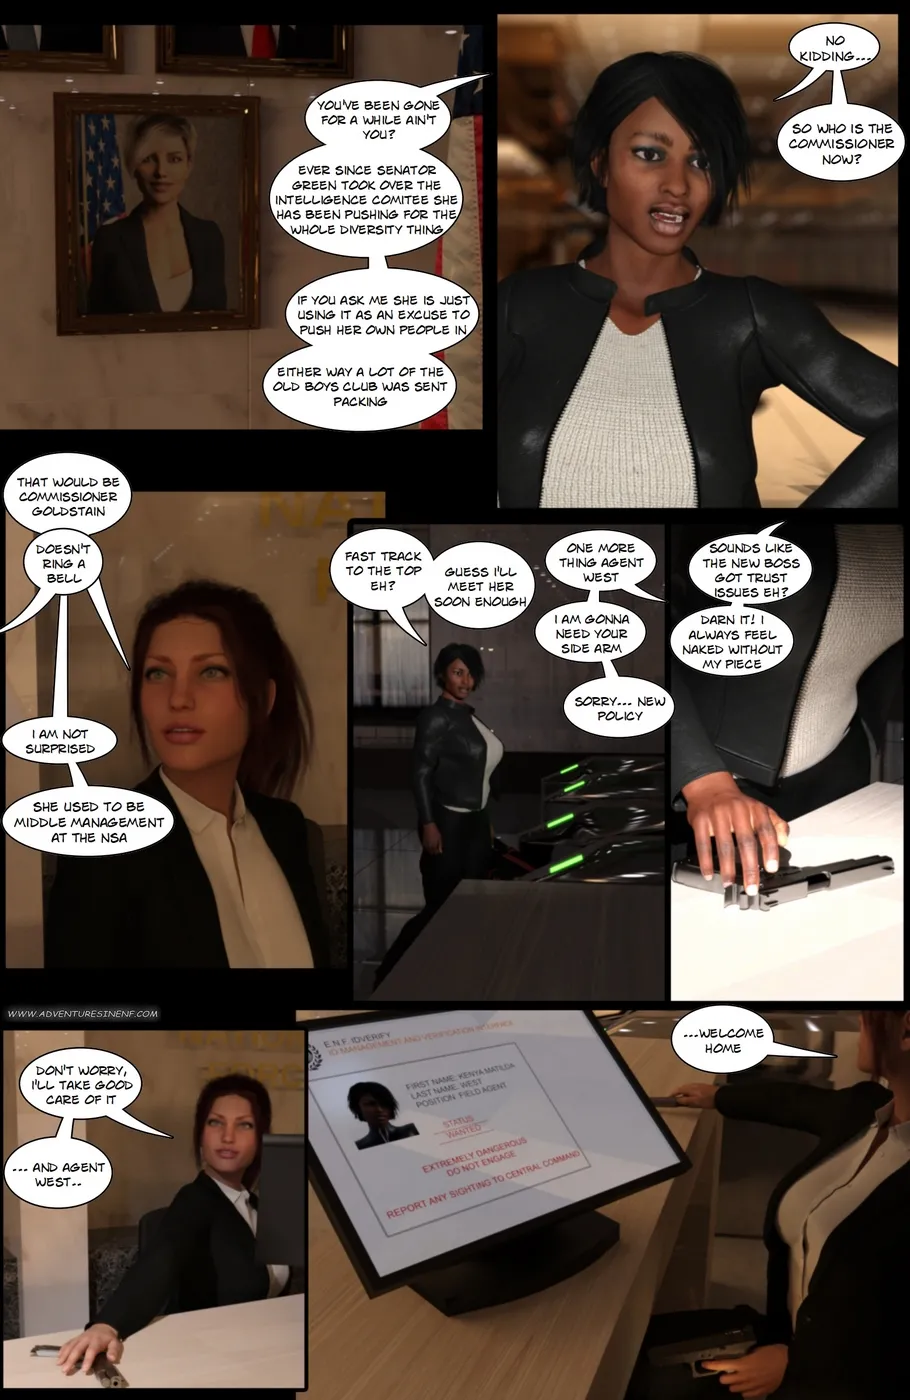 Agents of E.N.F.- The Cephalopod Strikes! - Page 4